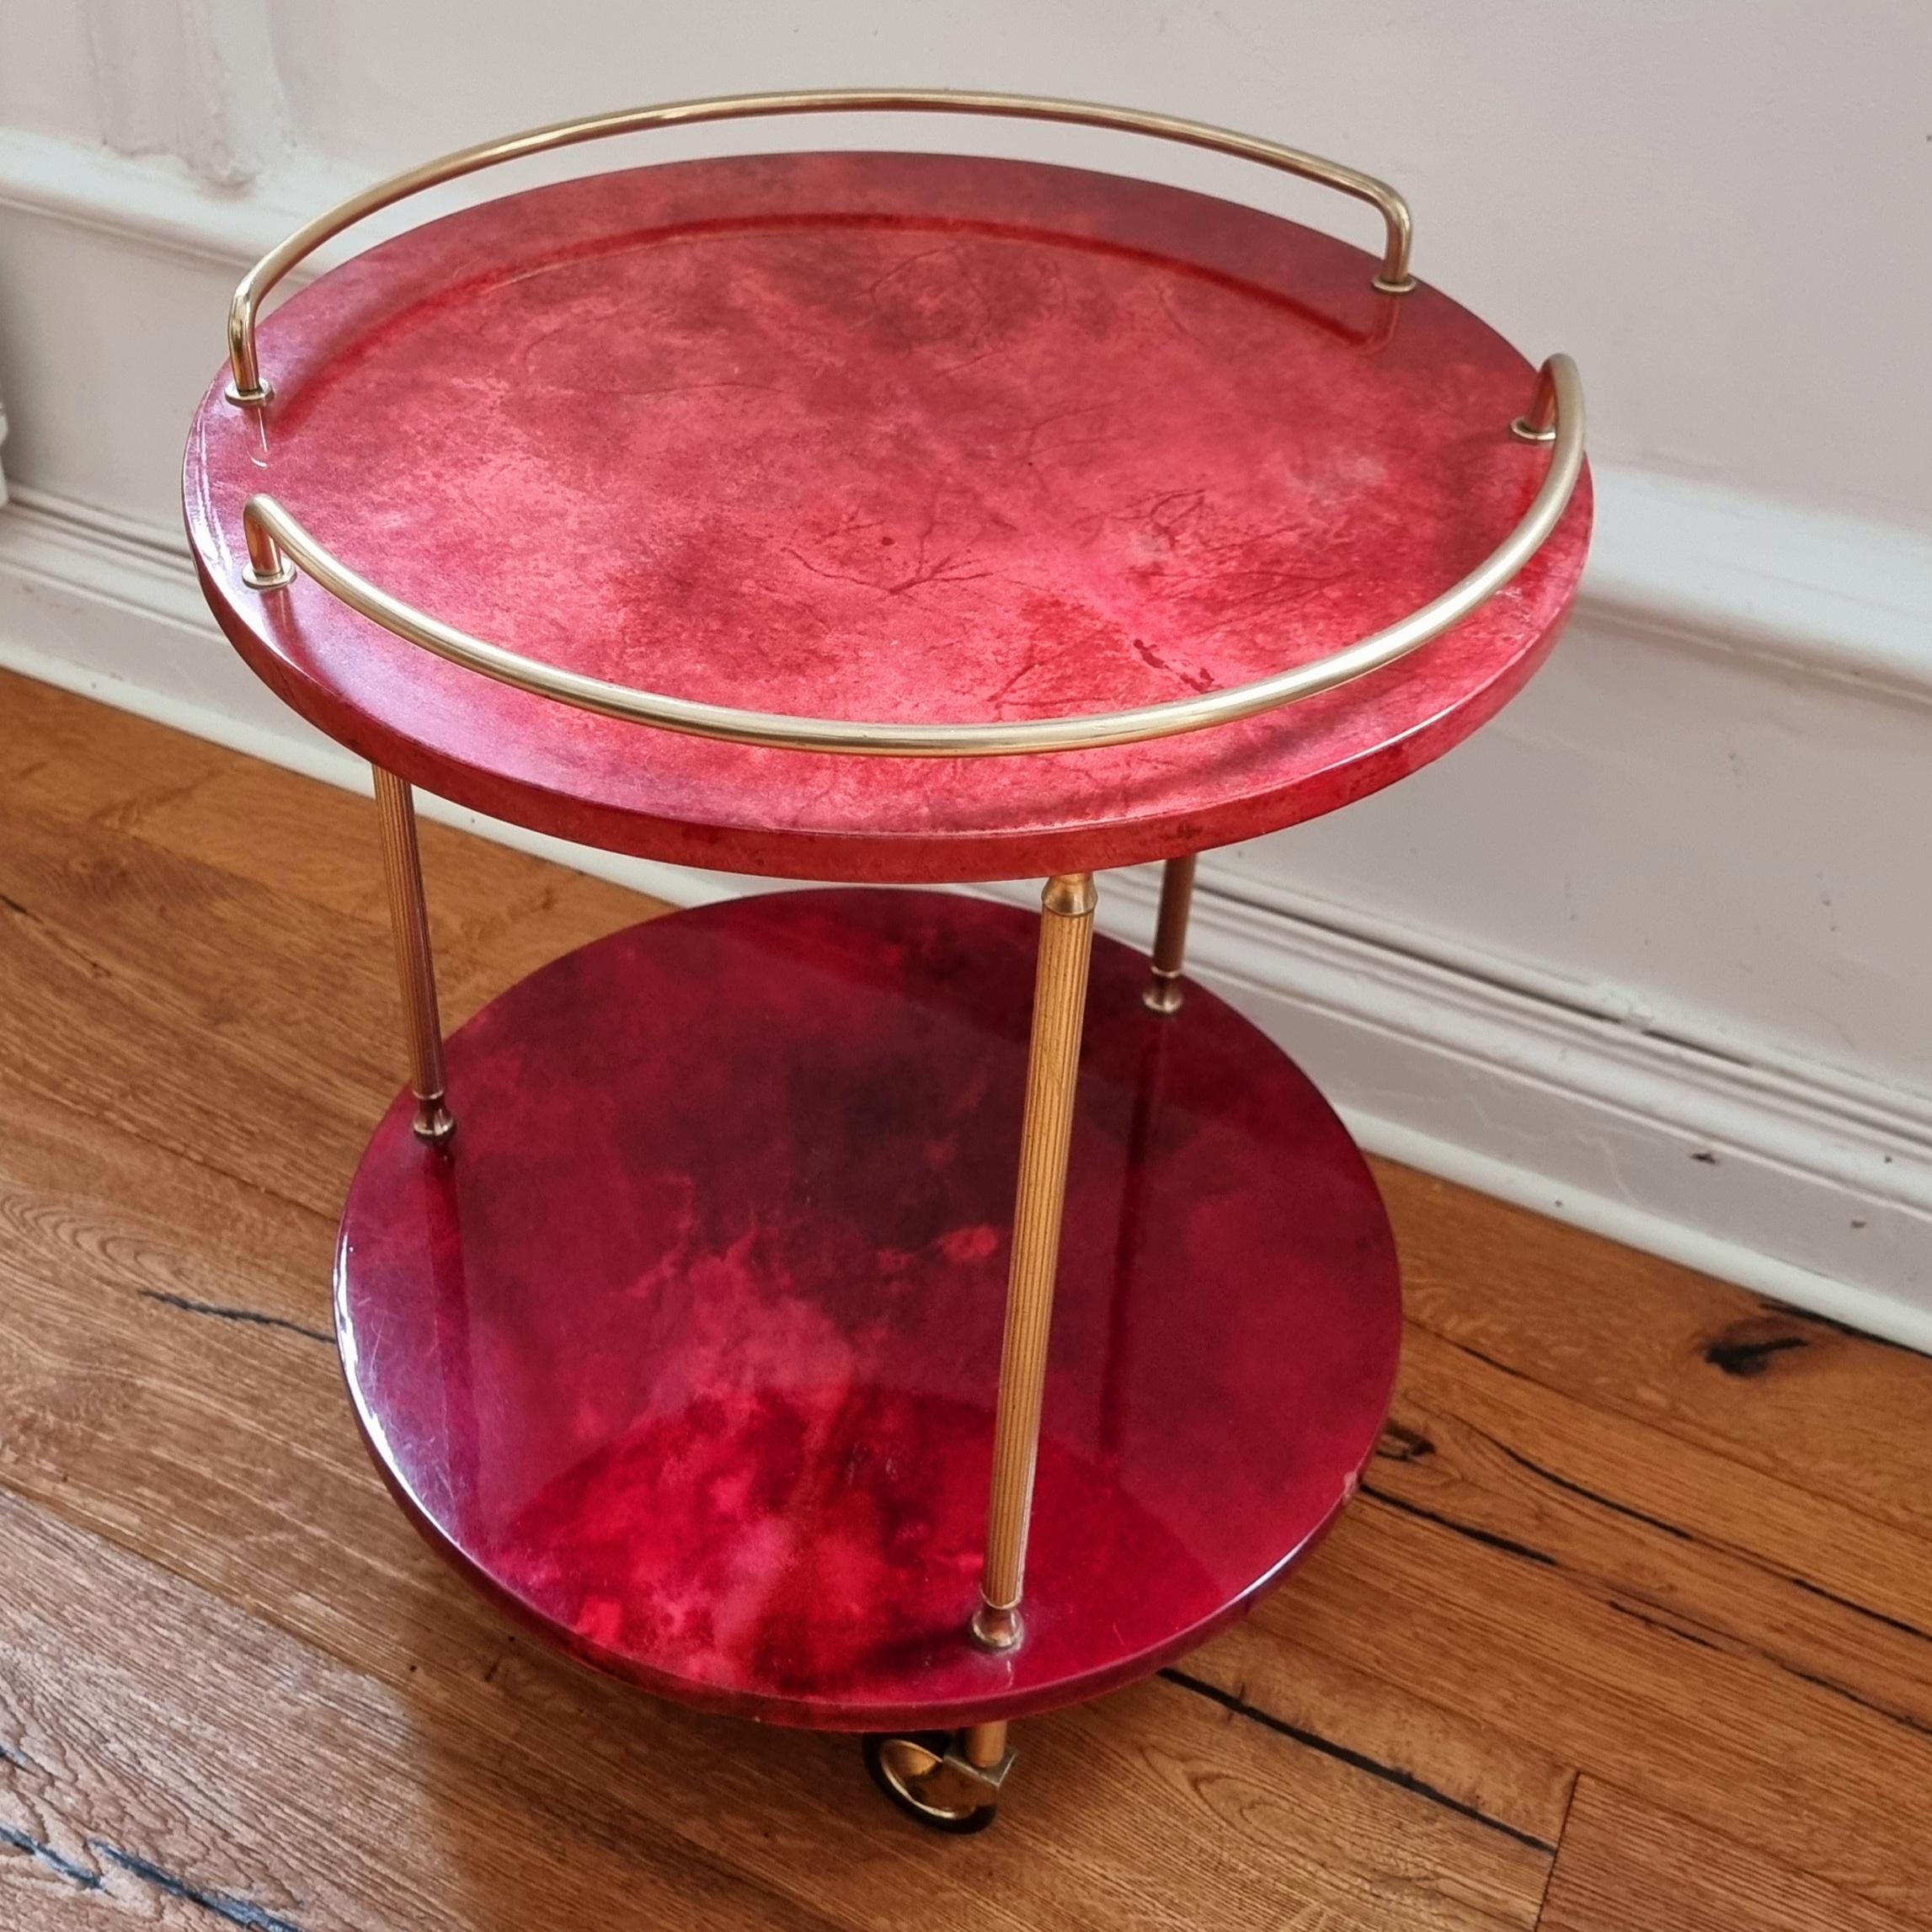 Two story bar cart by italian designer Aldo Tura. In wood with colored goatskin and transparant lacquer. 

Aldo Tura (1909-1963) began manufacturing his signature furniture in the 1930s, focusing on limited production of handcrafted designs